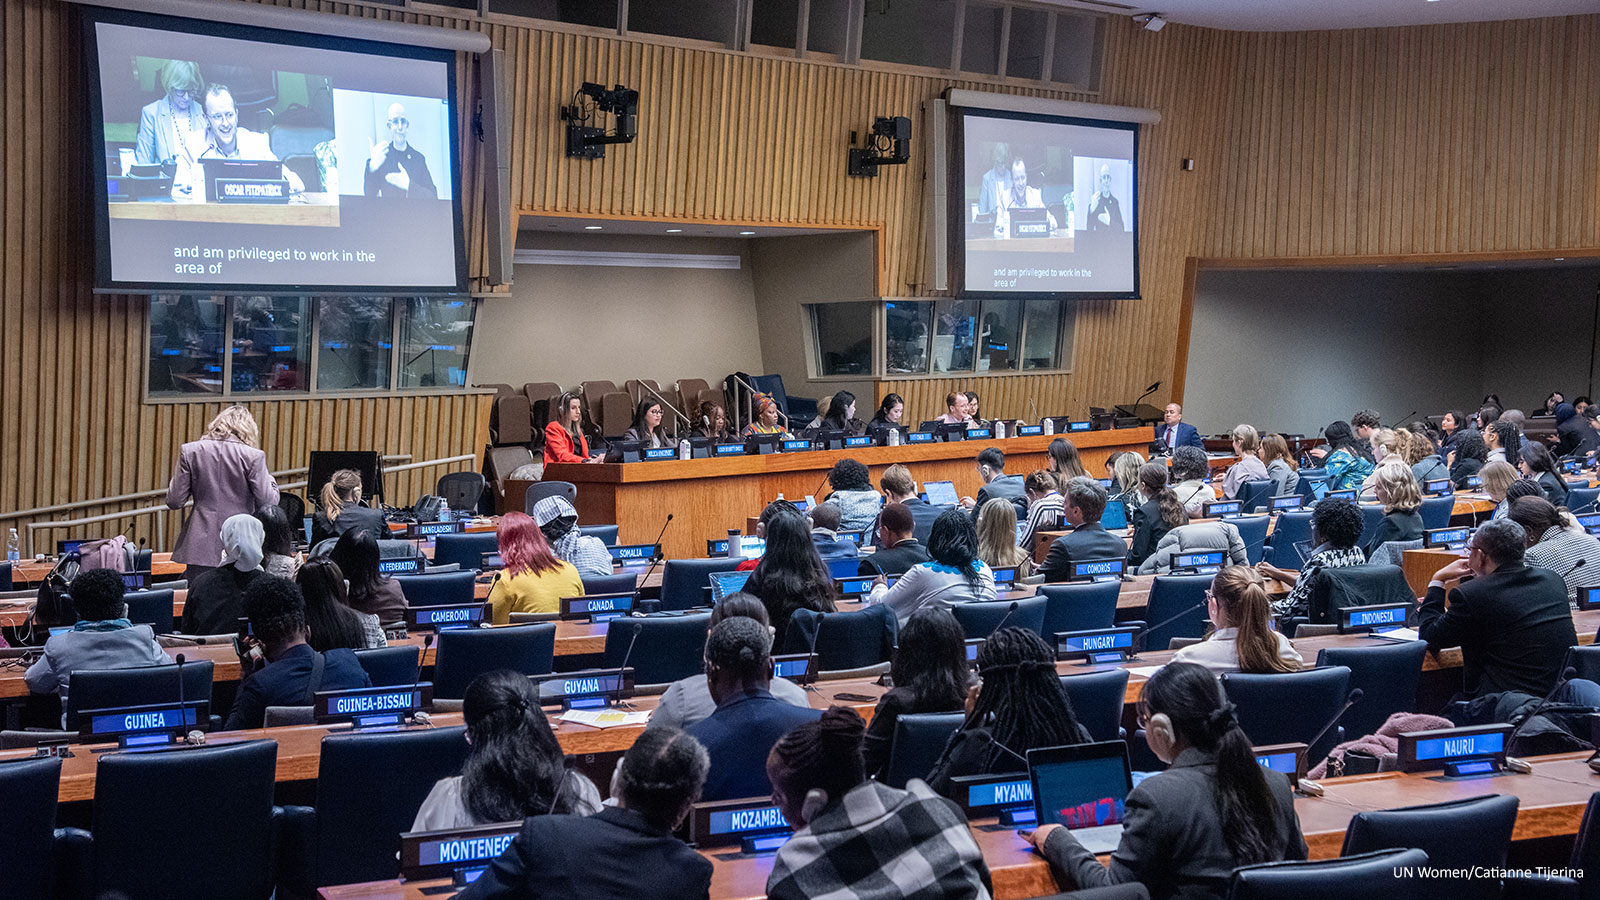 The dialogue brought together stakeholders from across sectors to highlight the importance of collective responsibility for enacting inclusive digital policies. Photo: UN Women/Catianne Tijerina